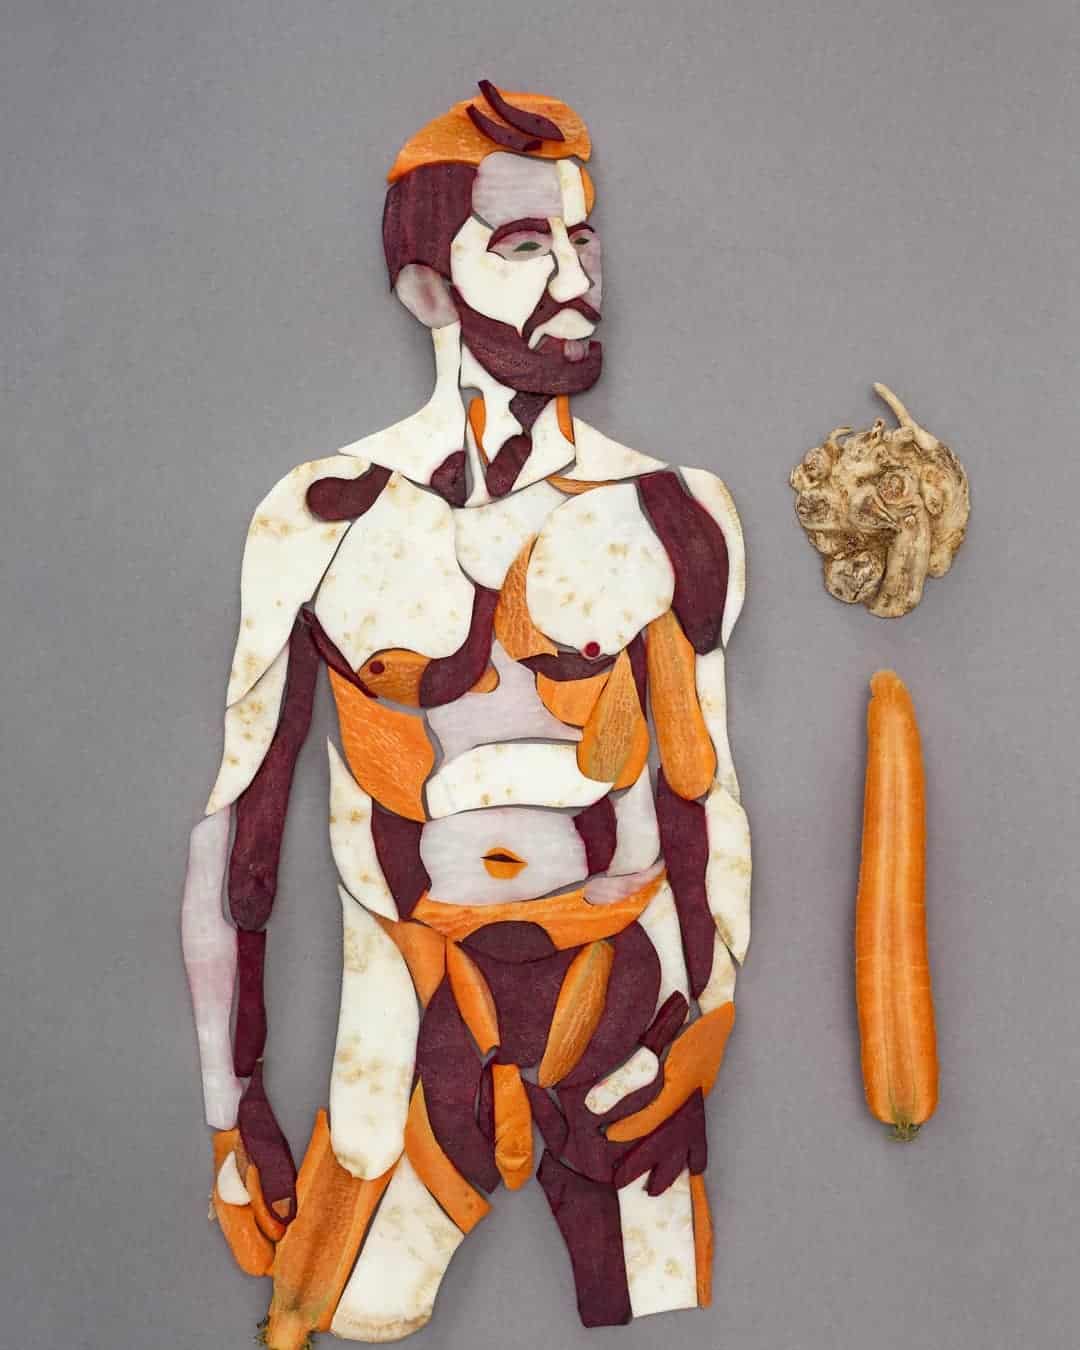 vegetable art in the shape of a man